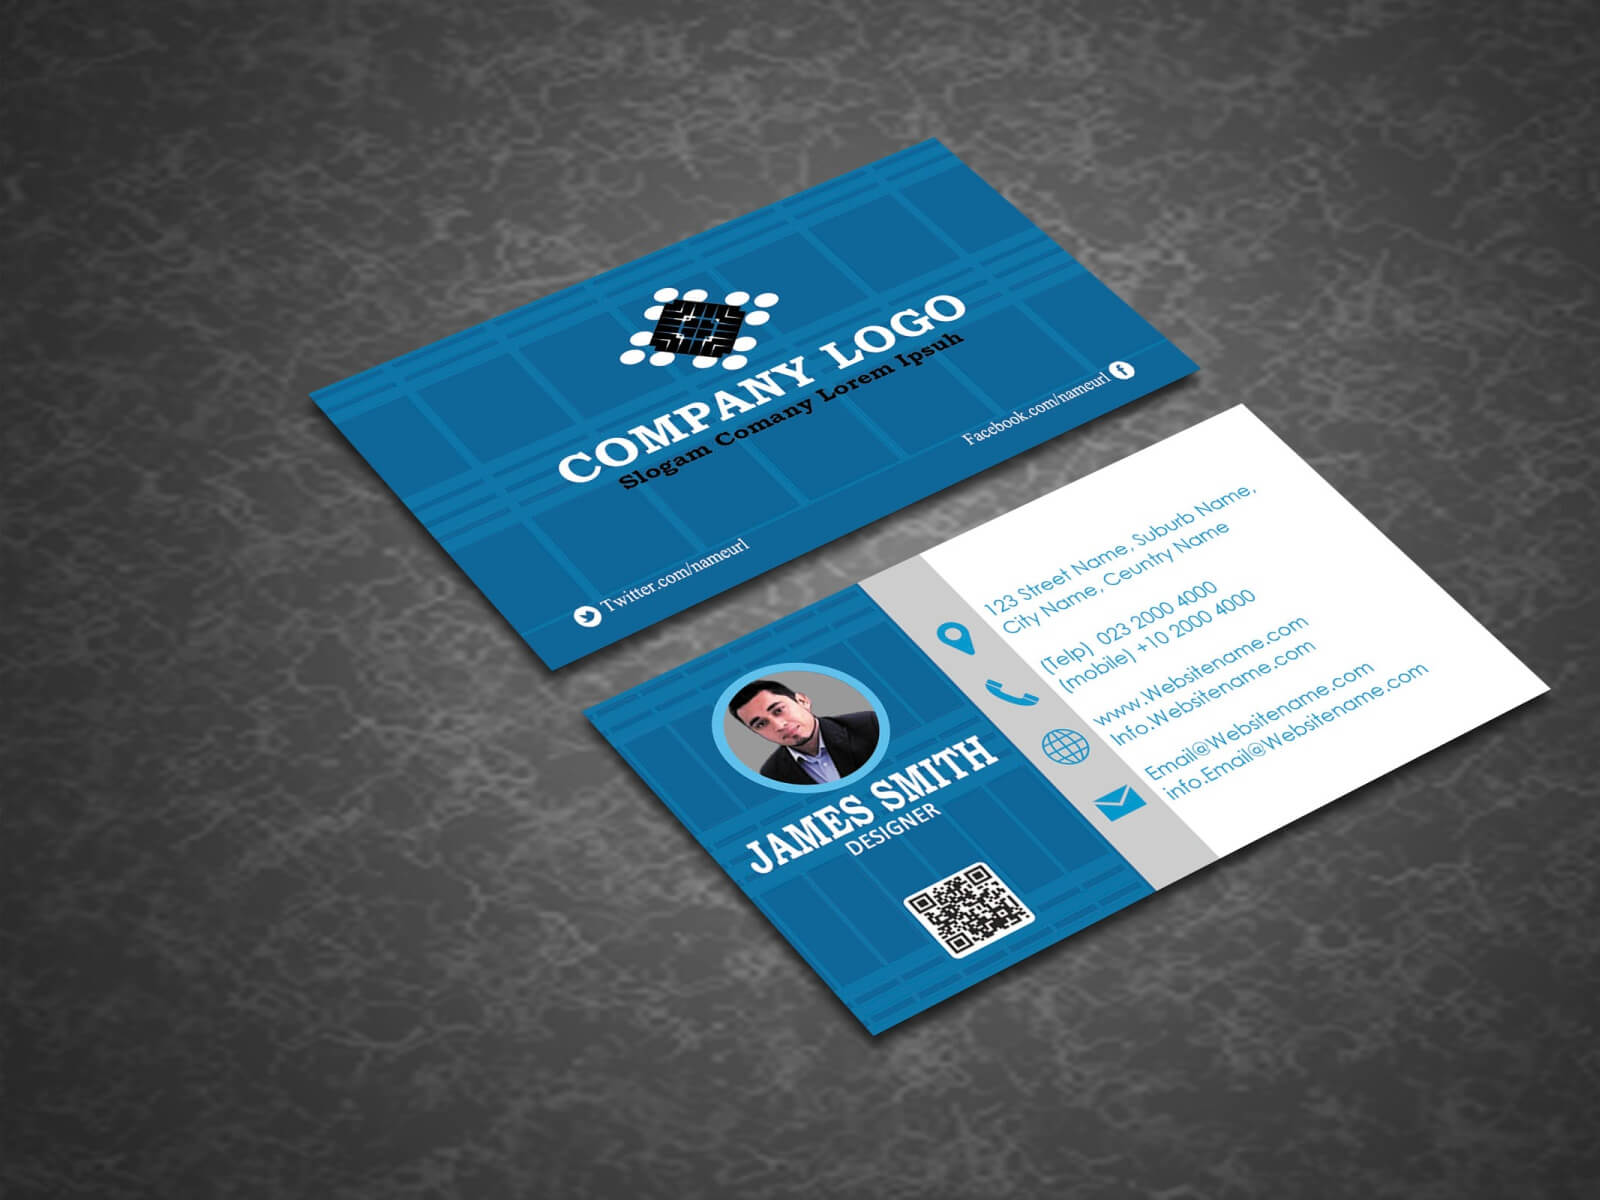 Profesional Business Cards Templatedesign Polsah On Dribbble Intended For Buisness Card Templates